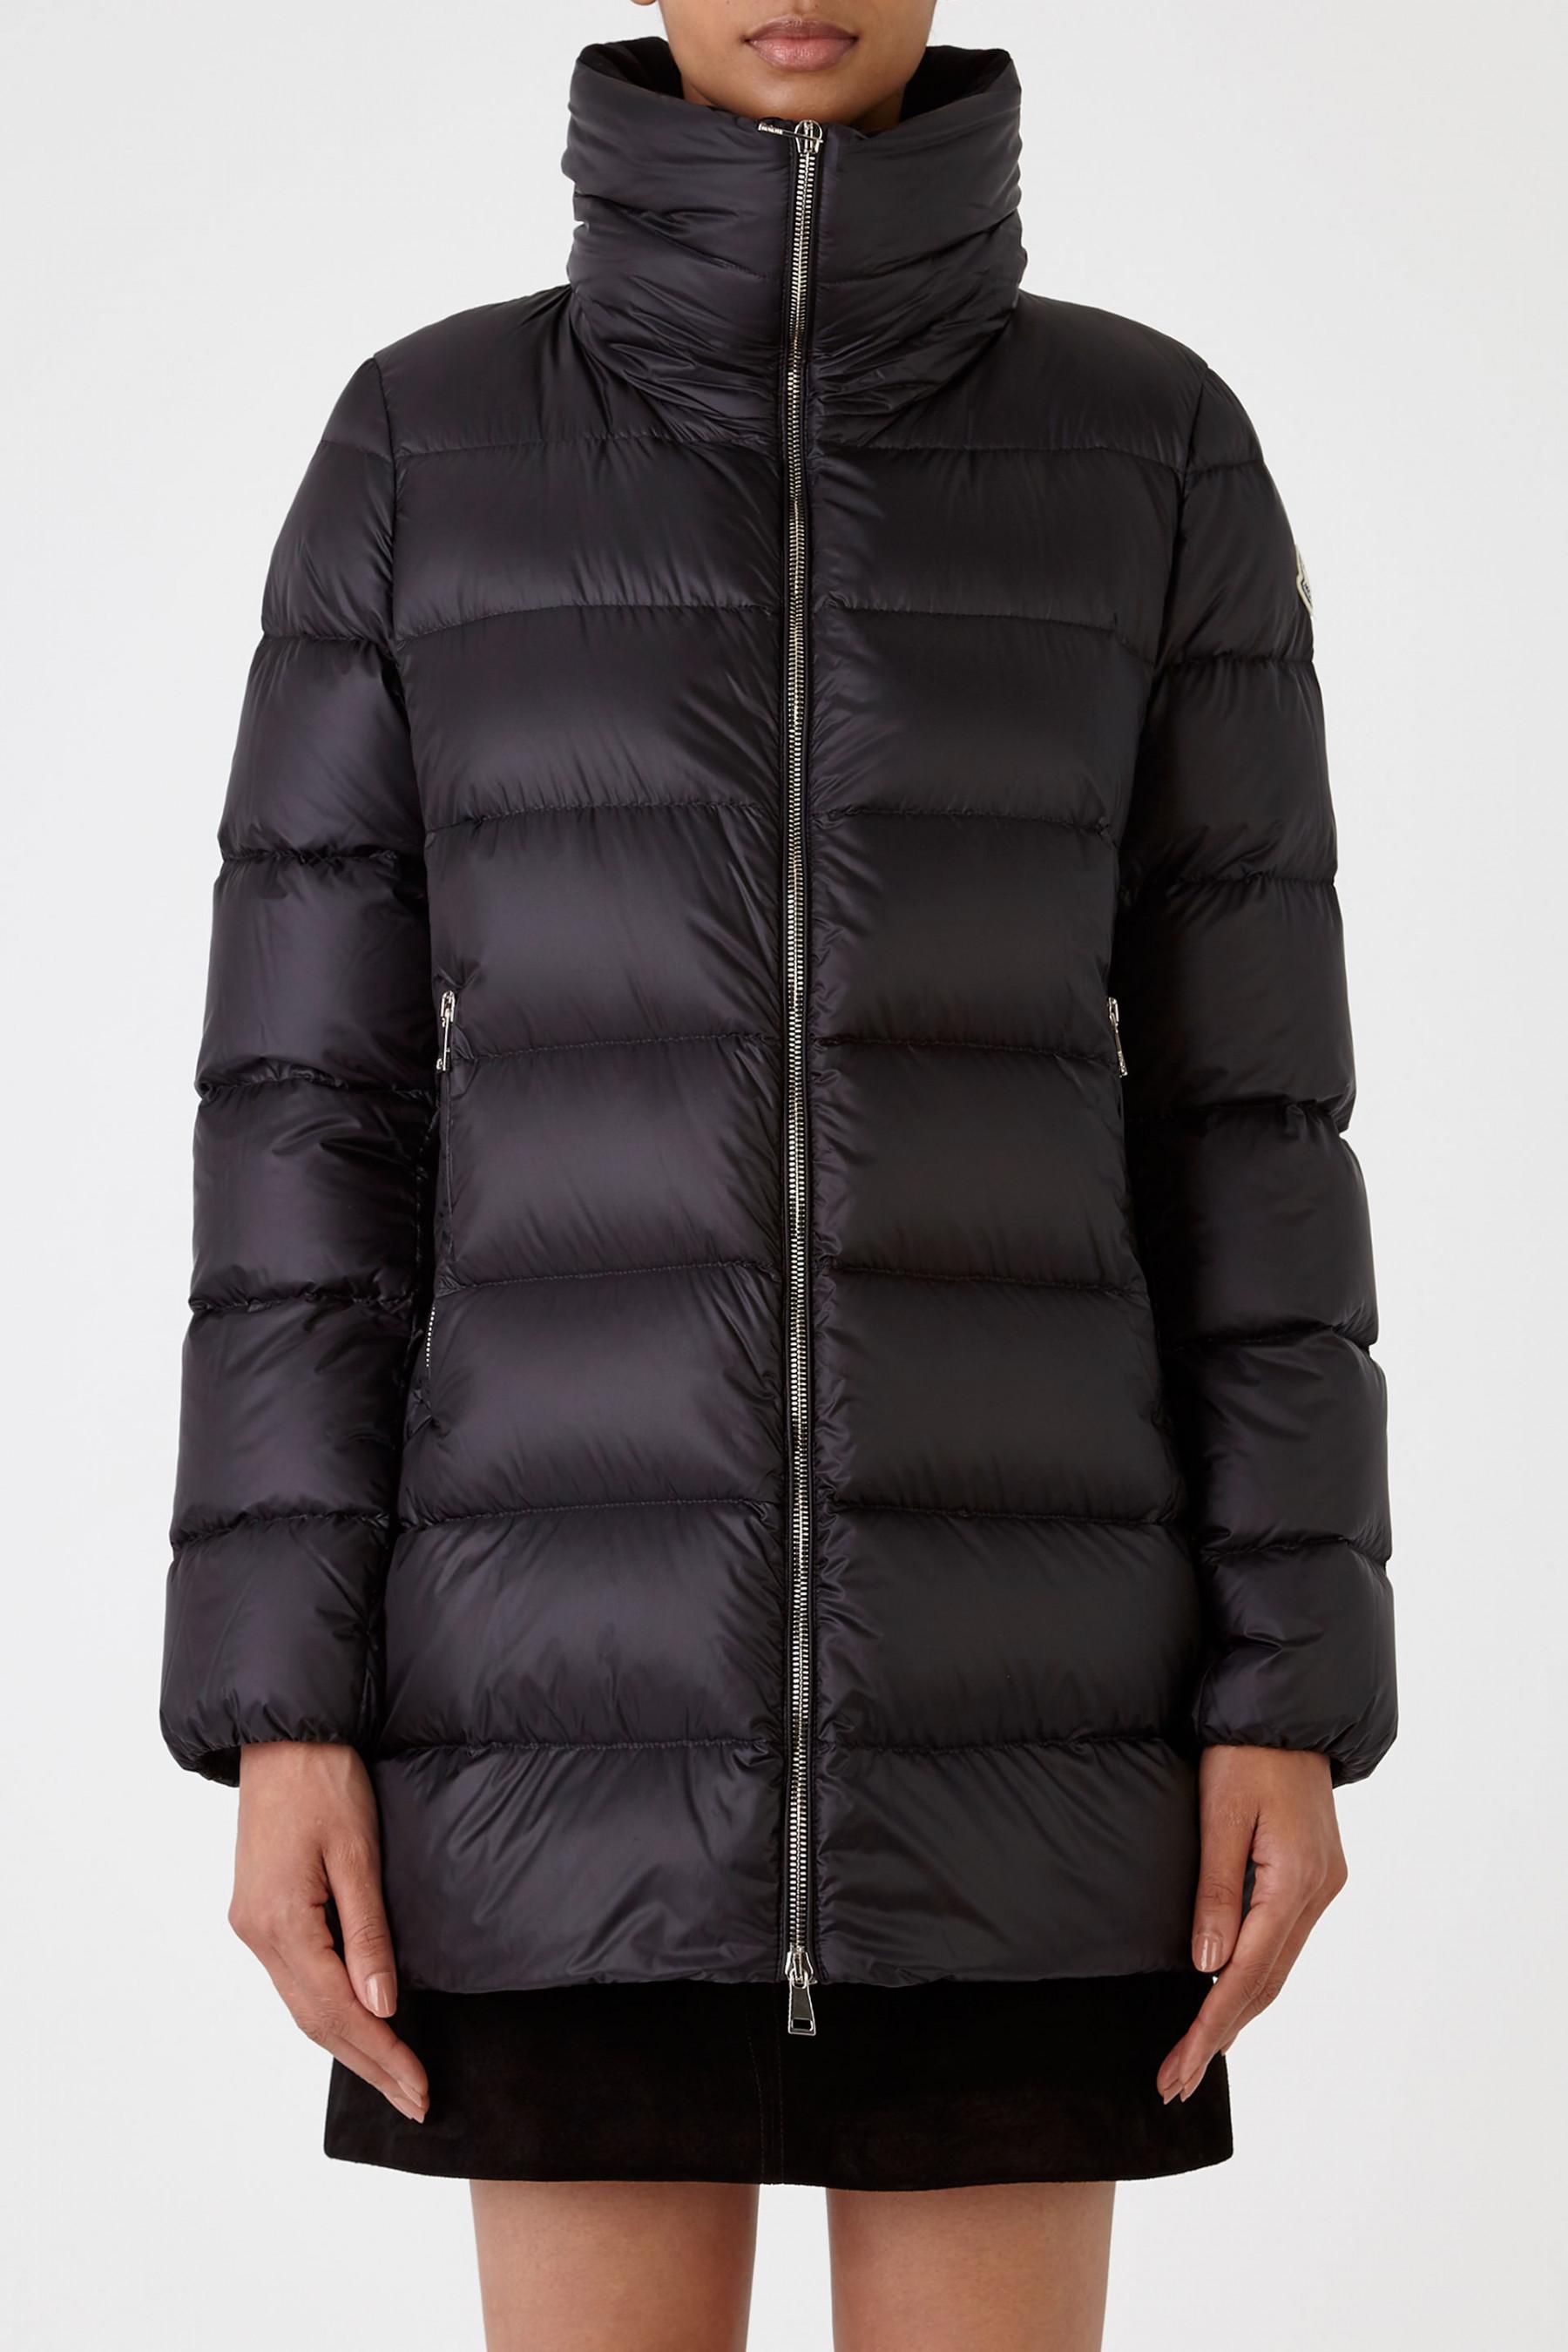 Moncler Synthetic Torcyn Quilted Shell Jacket in Black - Lyst